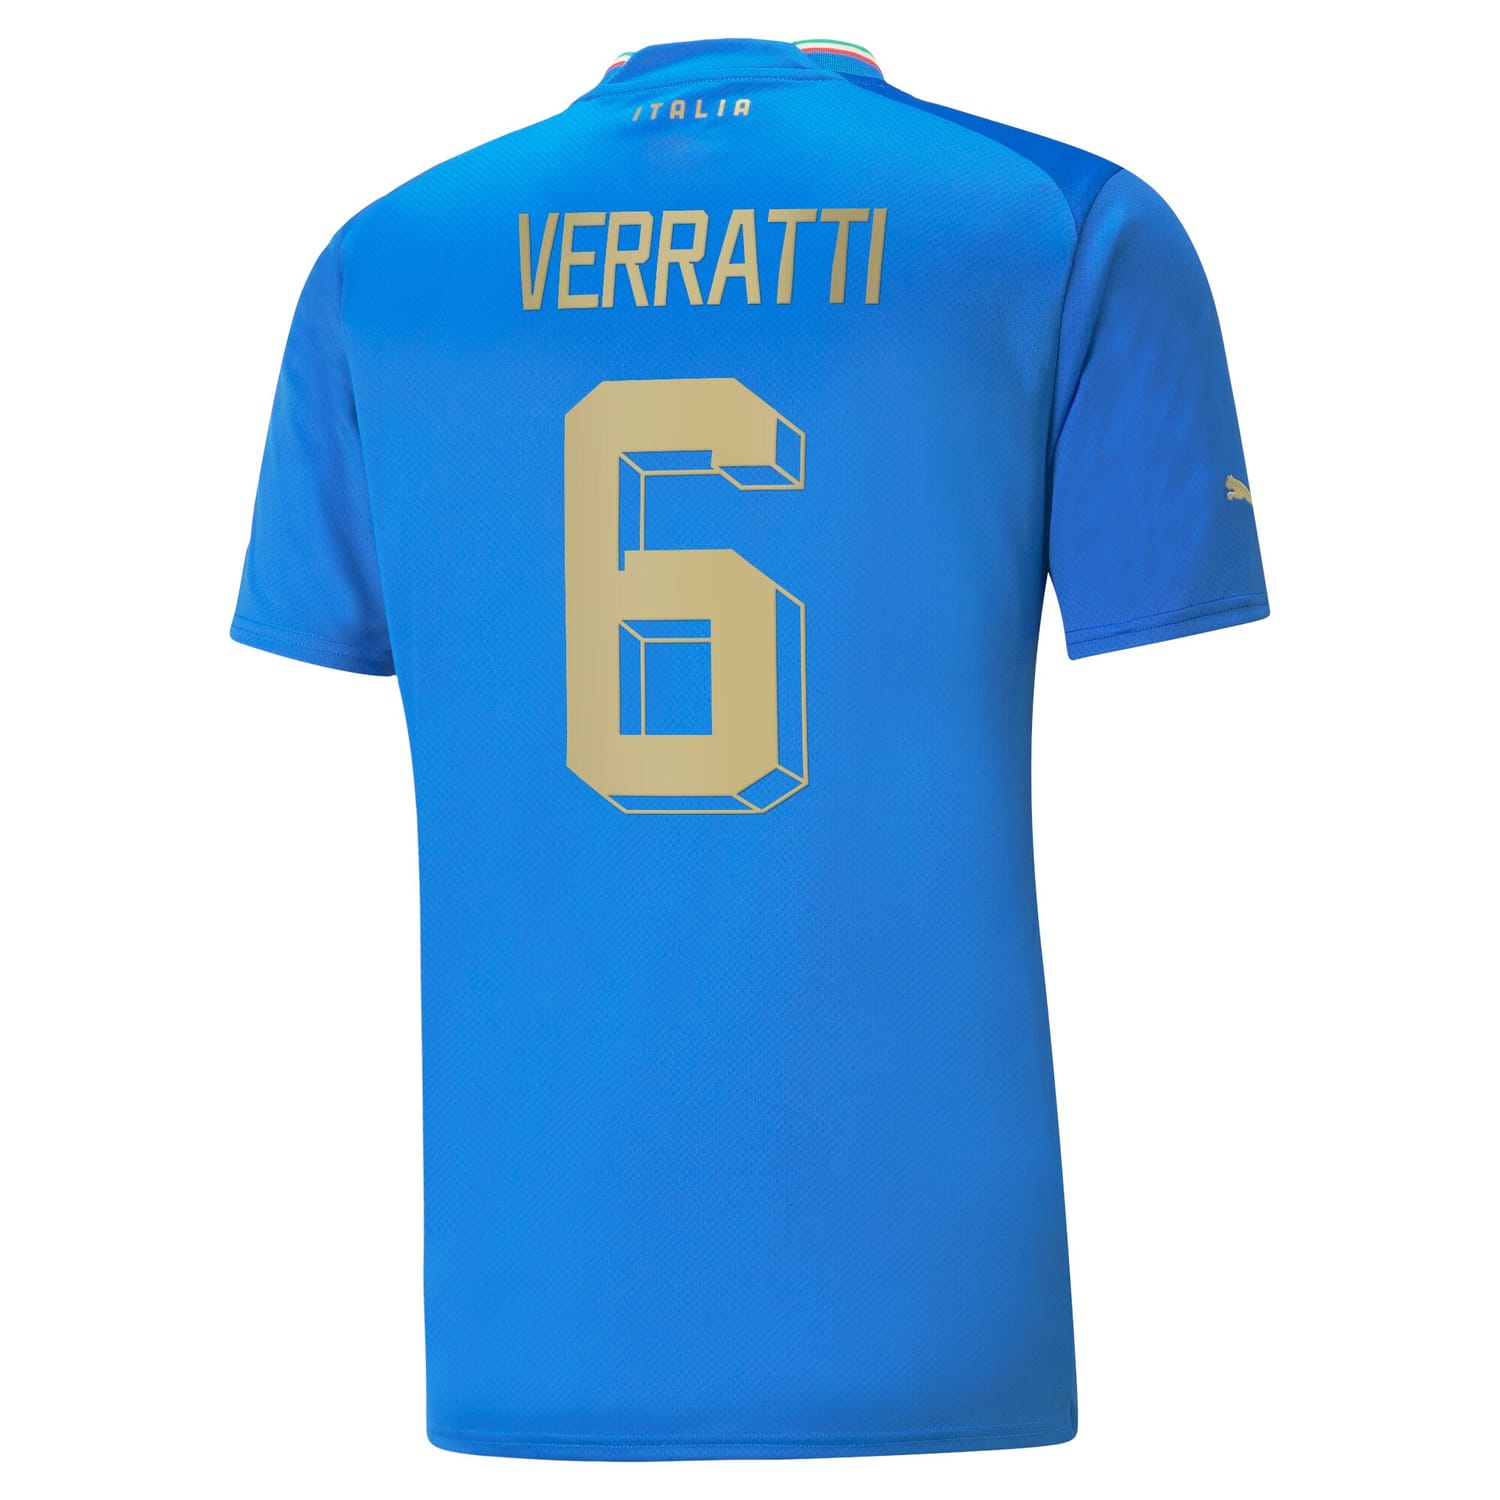 Italy National Team Home Jersey Shirt player Verratti 6 printing for Men